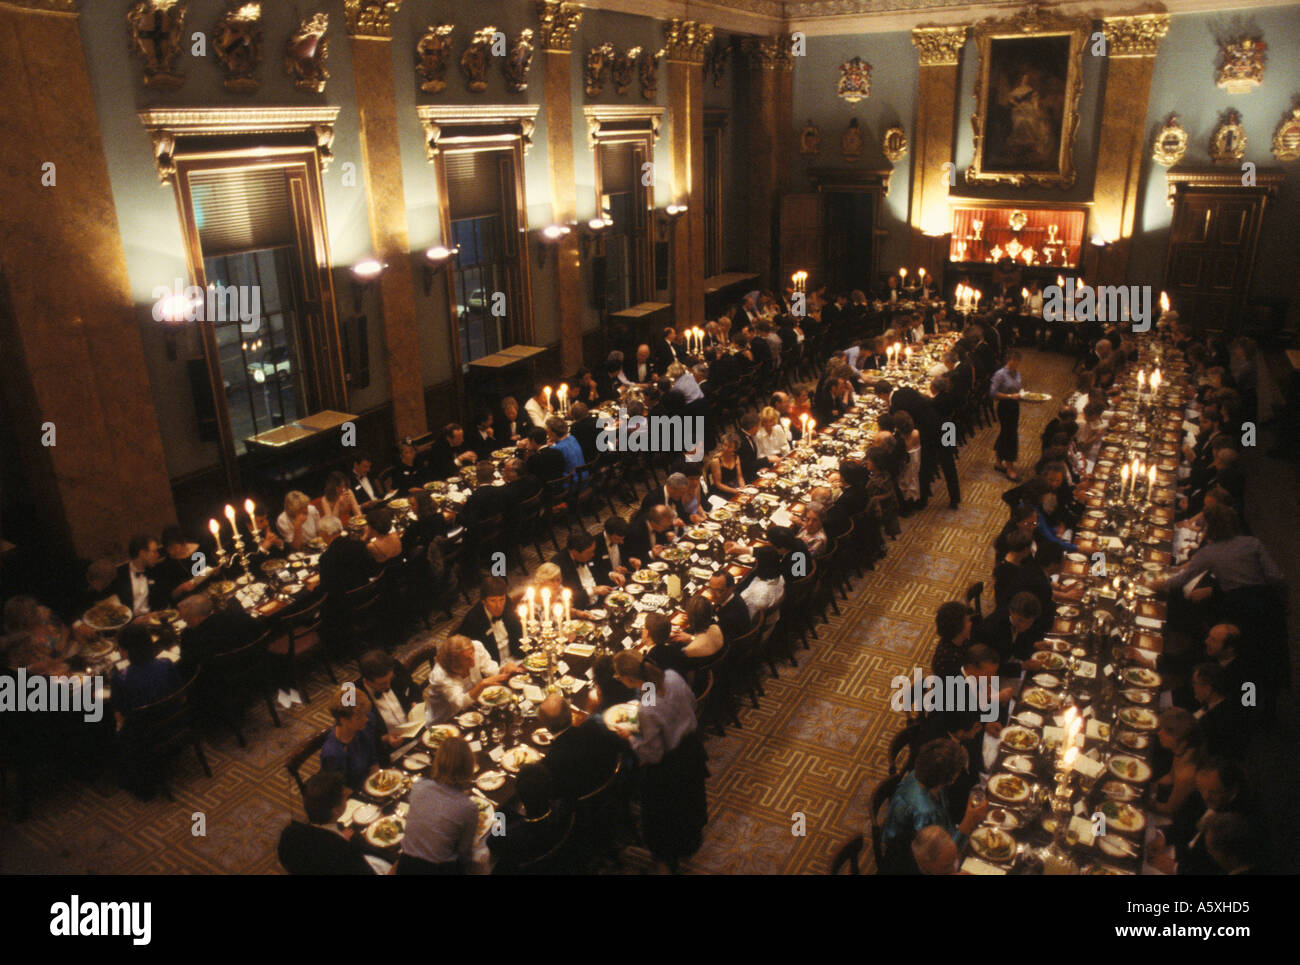 Fishmongers Hall The City Of London Livery Company. Worshipful Company of Fishmongers organiser un banquet pour le commerce du poisson HOMER SYKES Banque D'Images